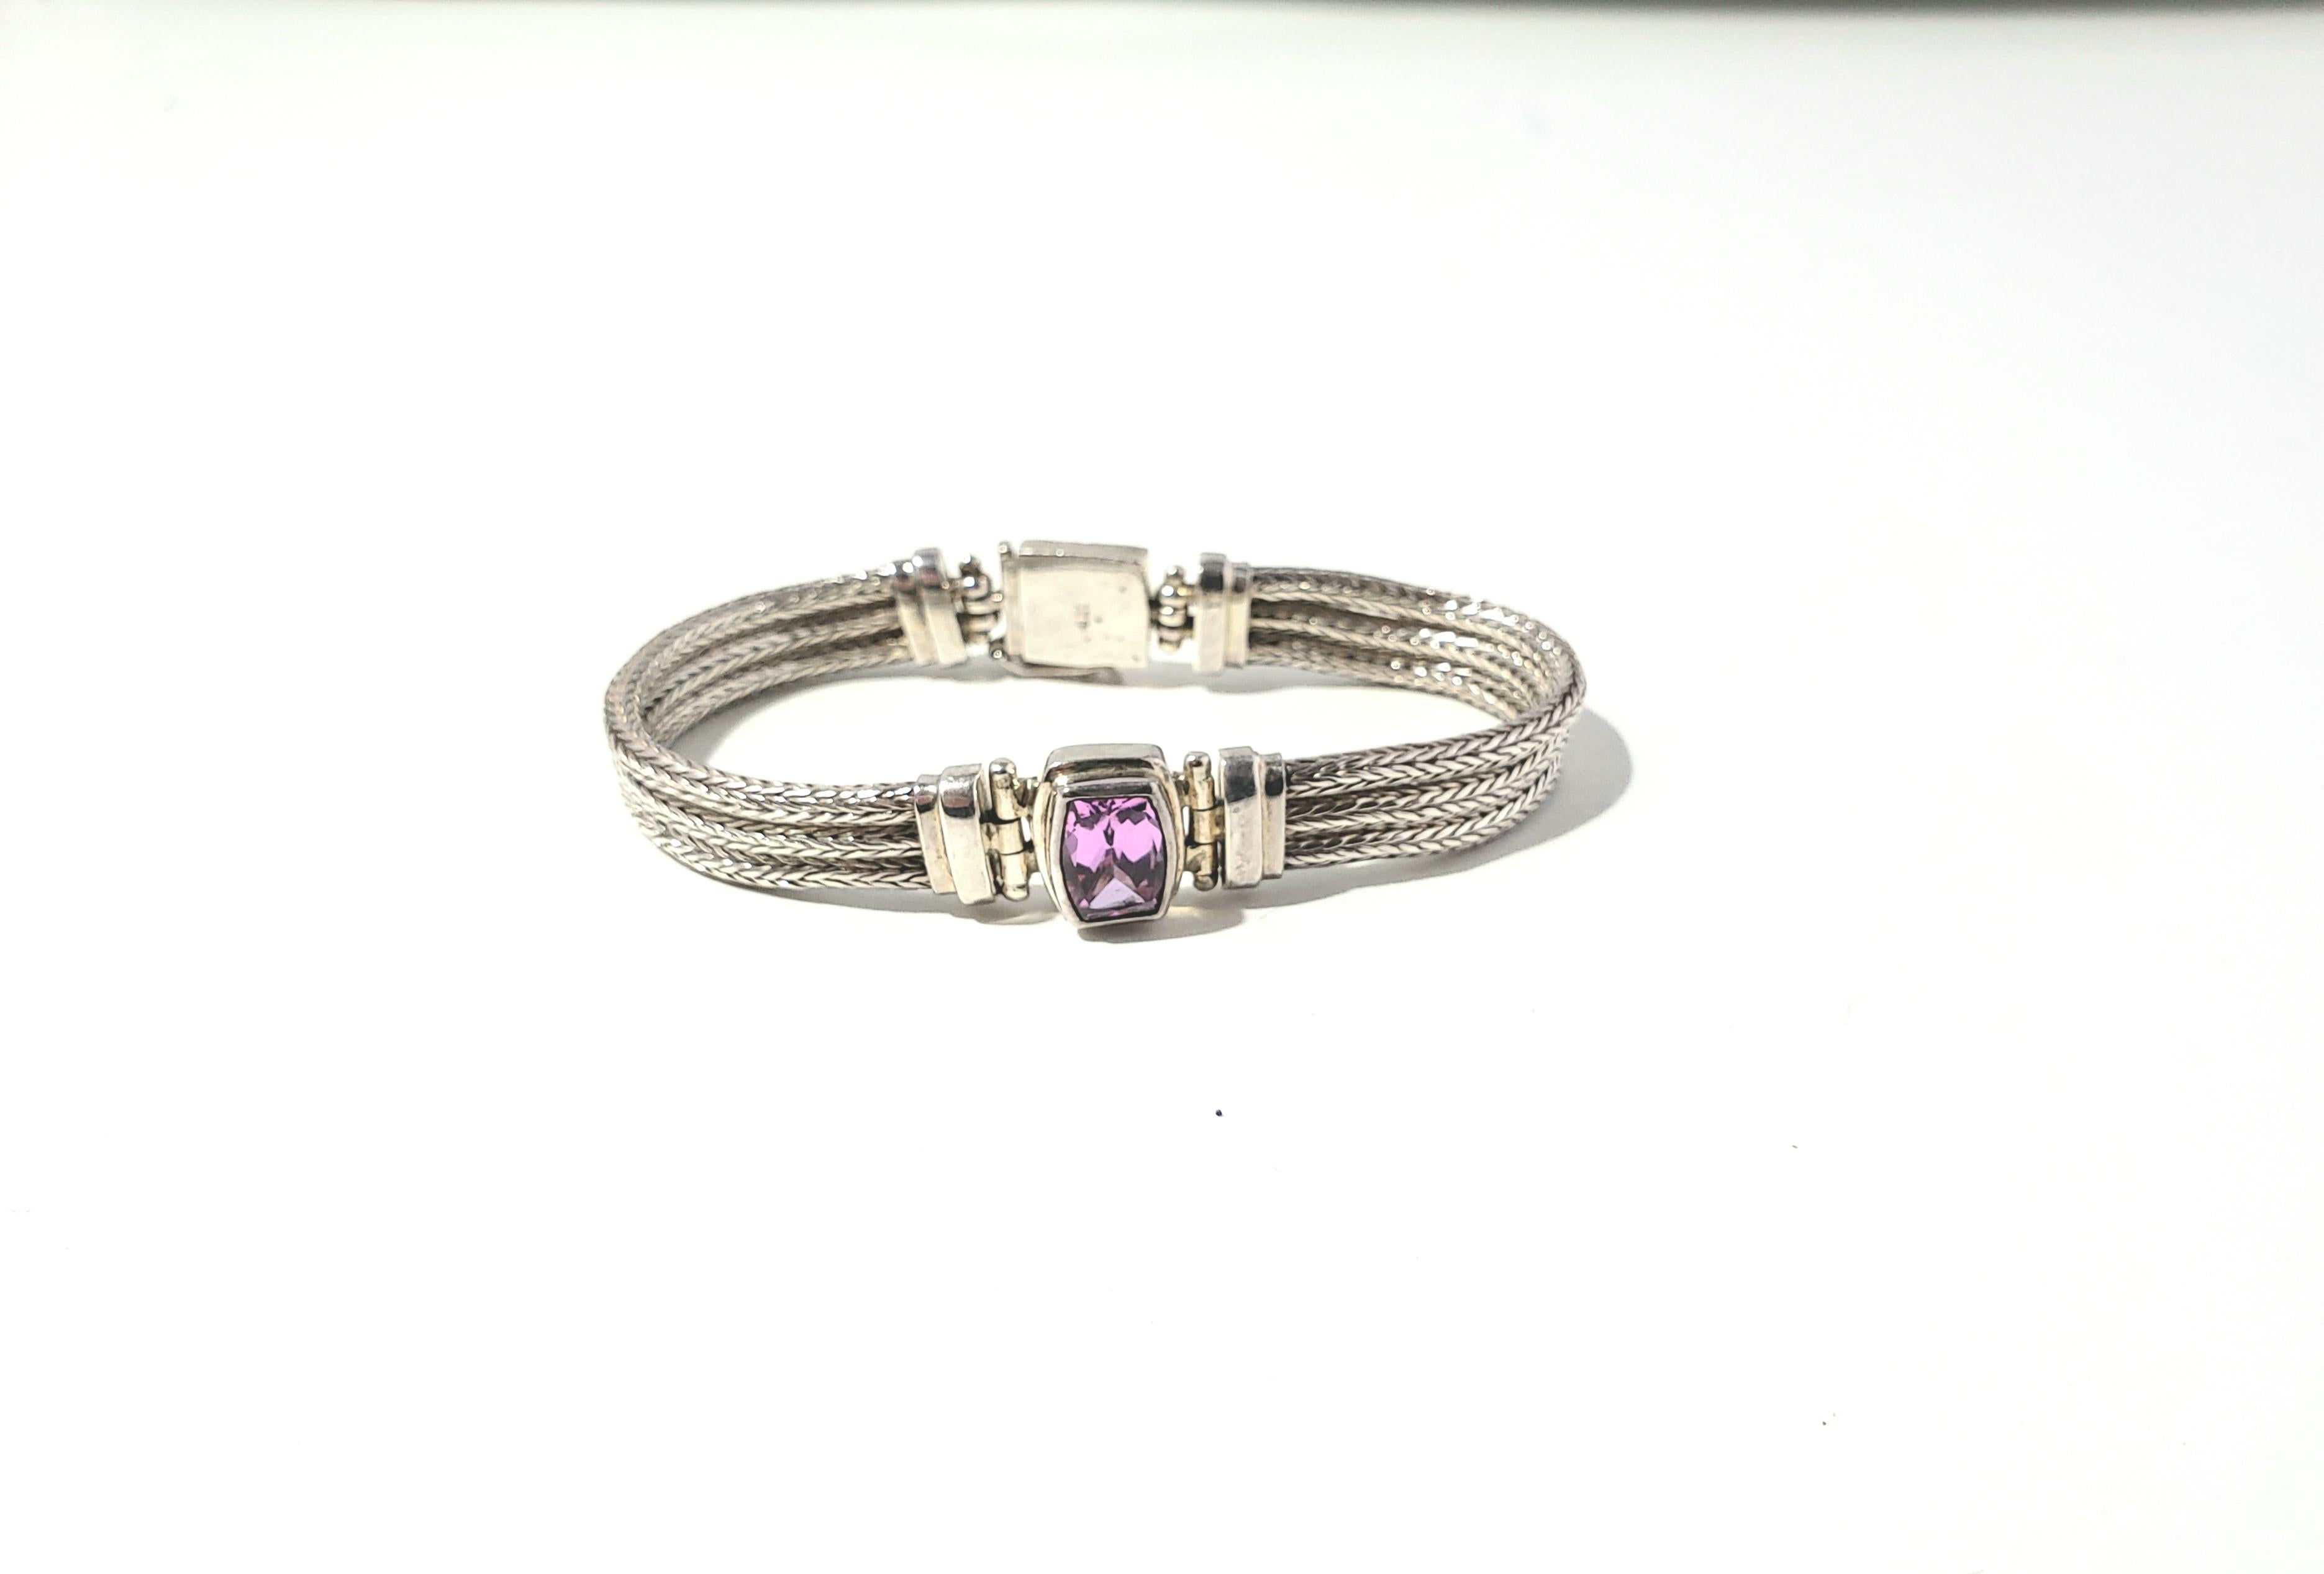 Sarda Sterling Silver Three Strand Pink Gemstone Bracelet

This is a beautiful sterling silver three strand pink gemstone bracelet designed by Sarda. 

Measurements:     Measures 7 and 1/2 inches in length, 5/16 inches in width.  Pink stone measures